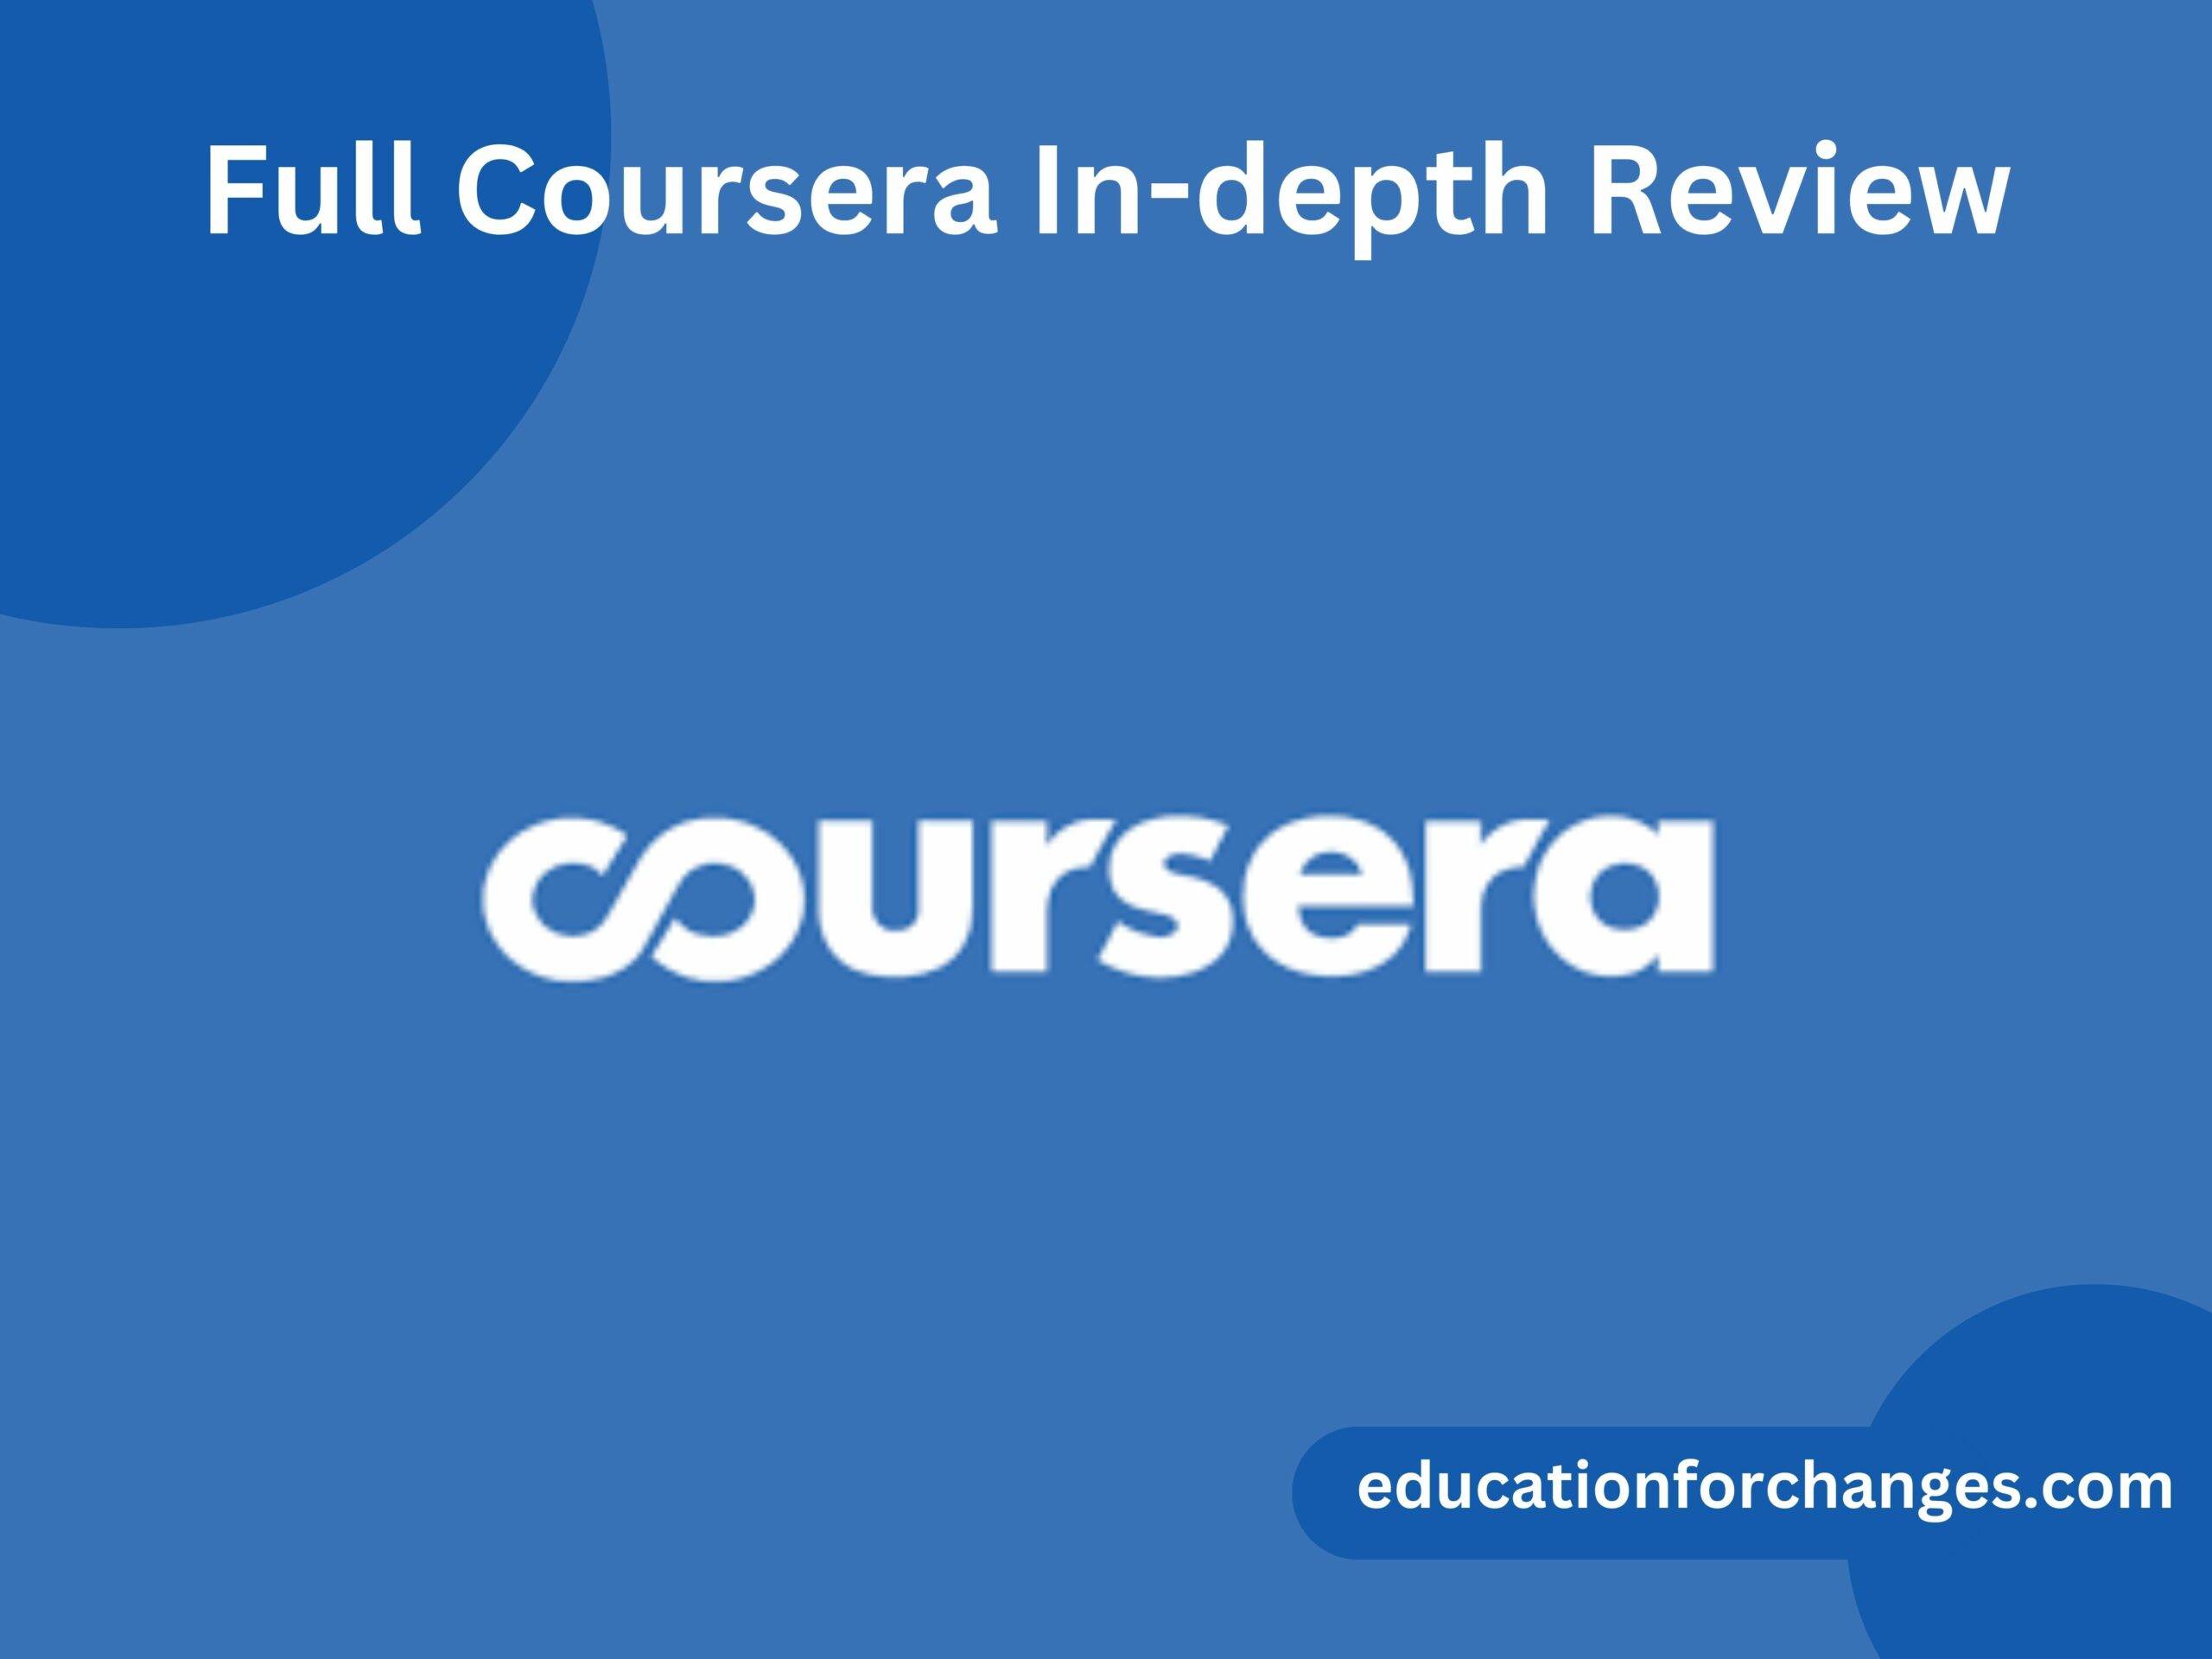 Full Coursera In-depth Review